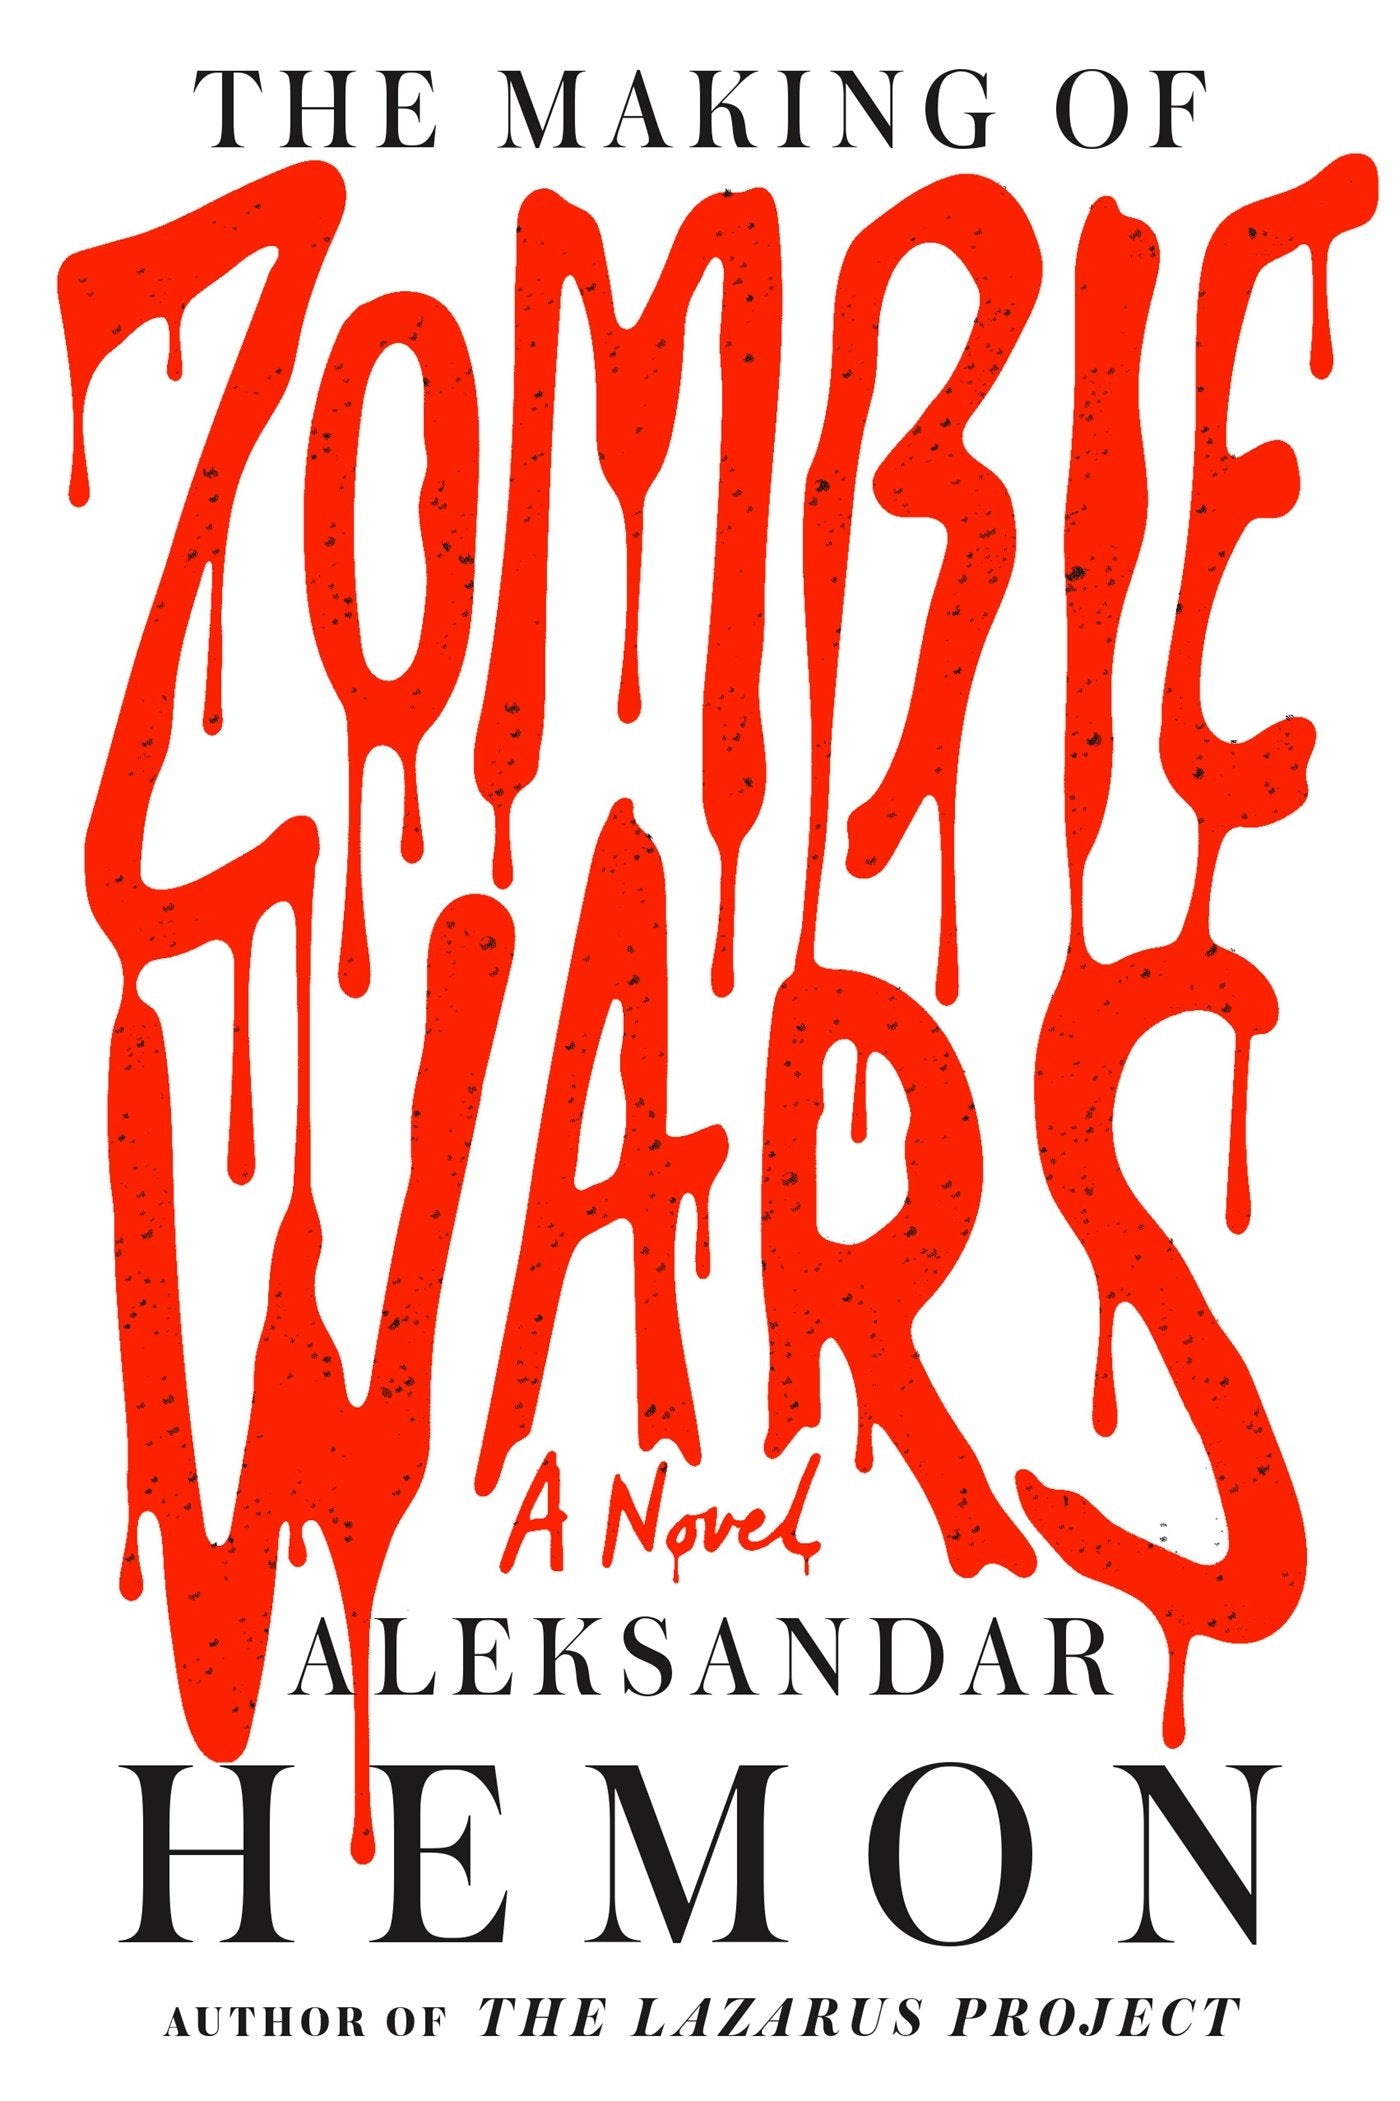 The Making of Zombie Wars: A Novel